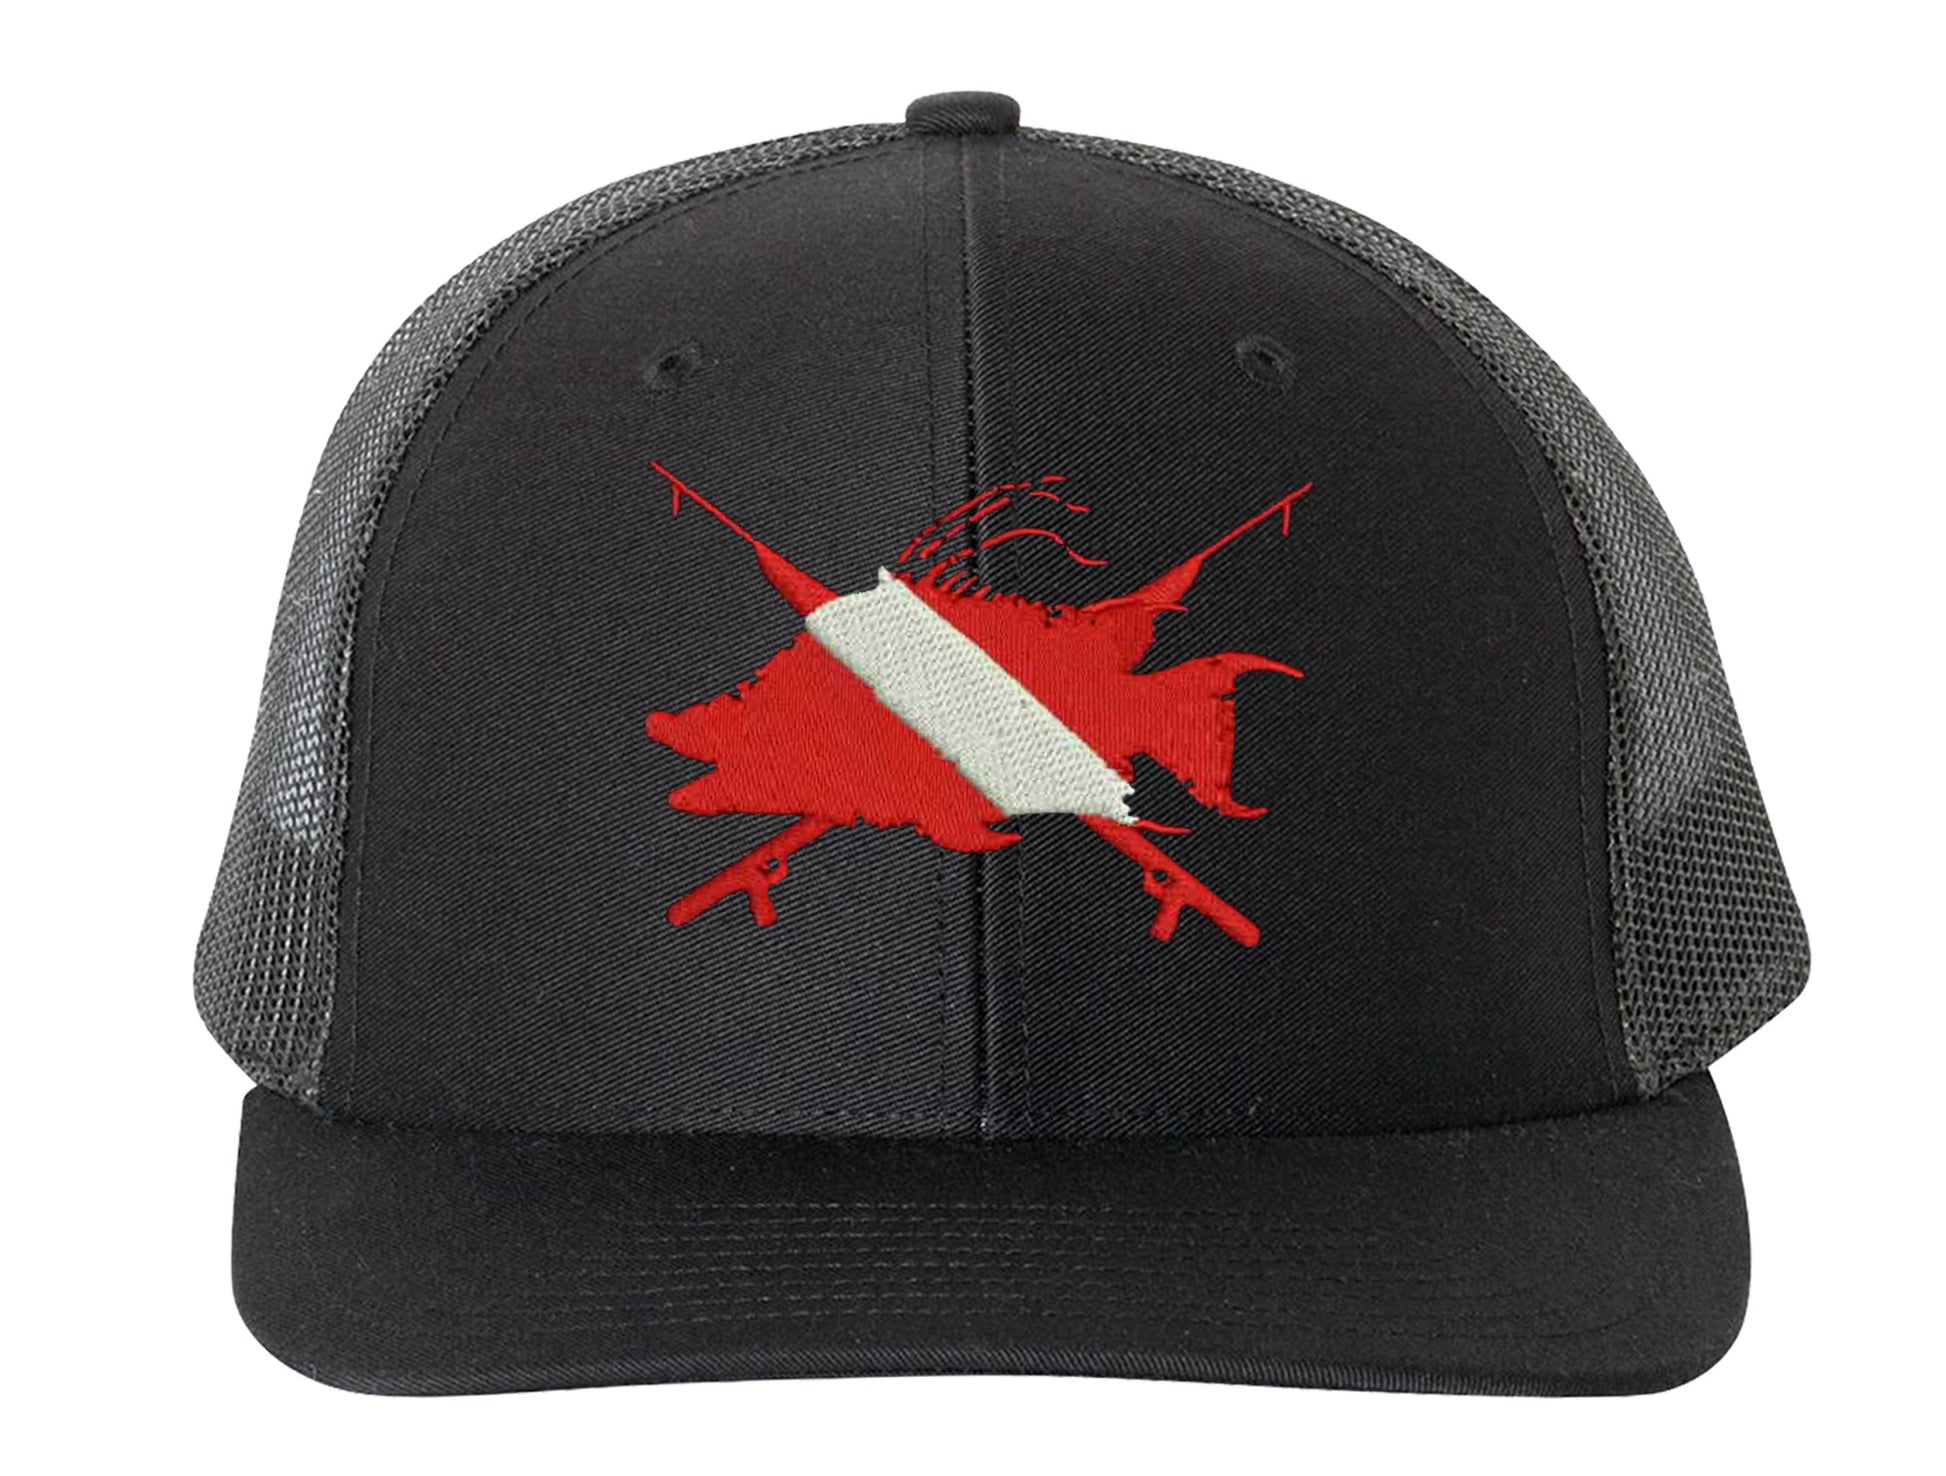 Hogfish Dive Spears Structured Trucker Snapback Hats - *9 Colors! Navy/White Mesh